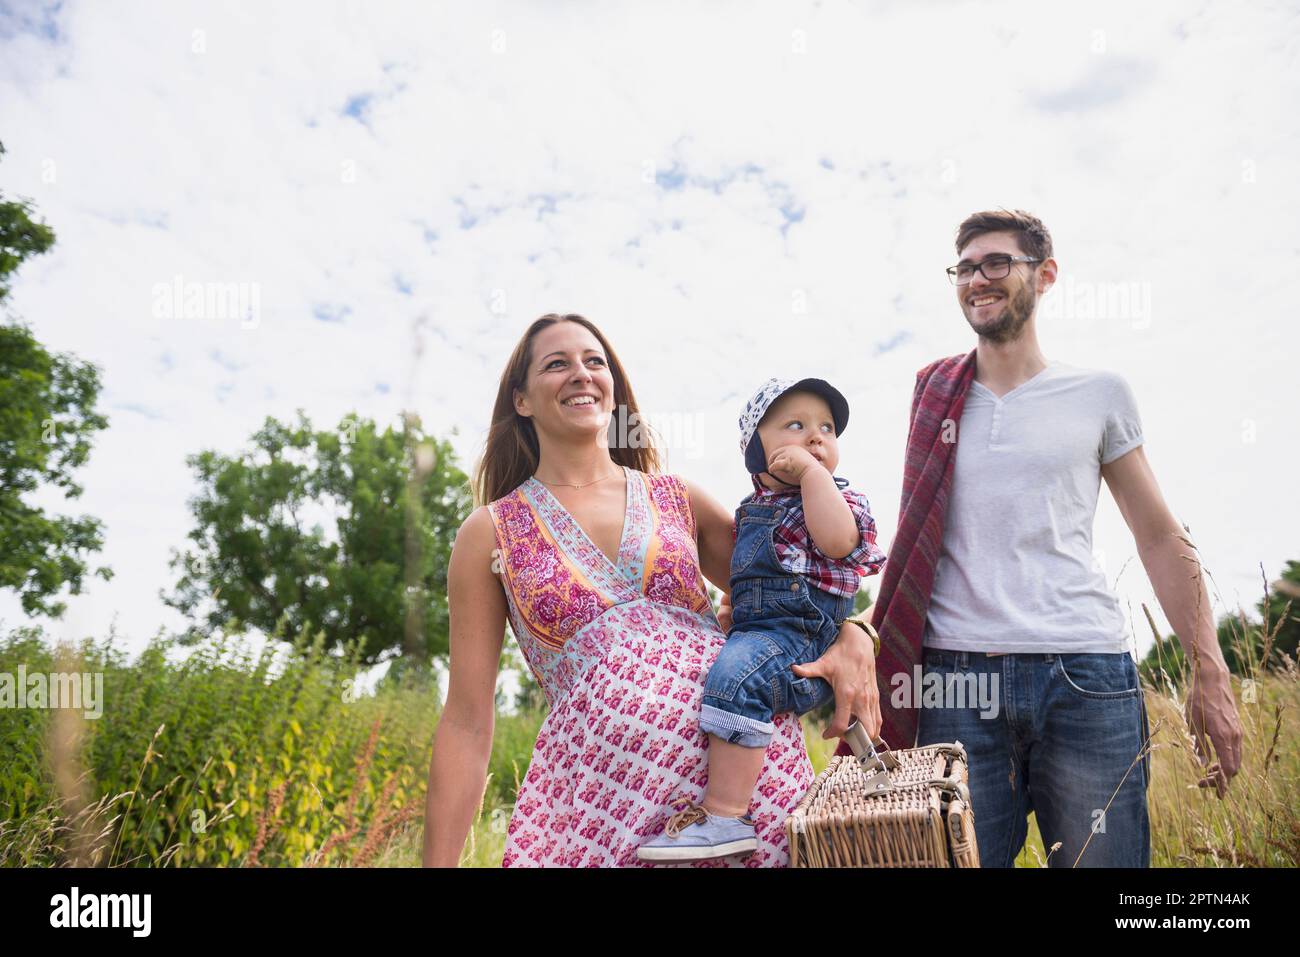 Family with picnic basket walking on meadow and smiling, Bavaria, Germany Stock Photo